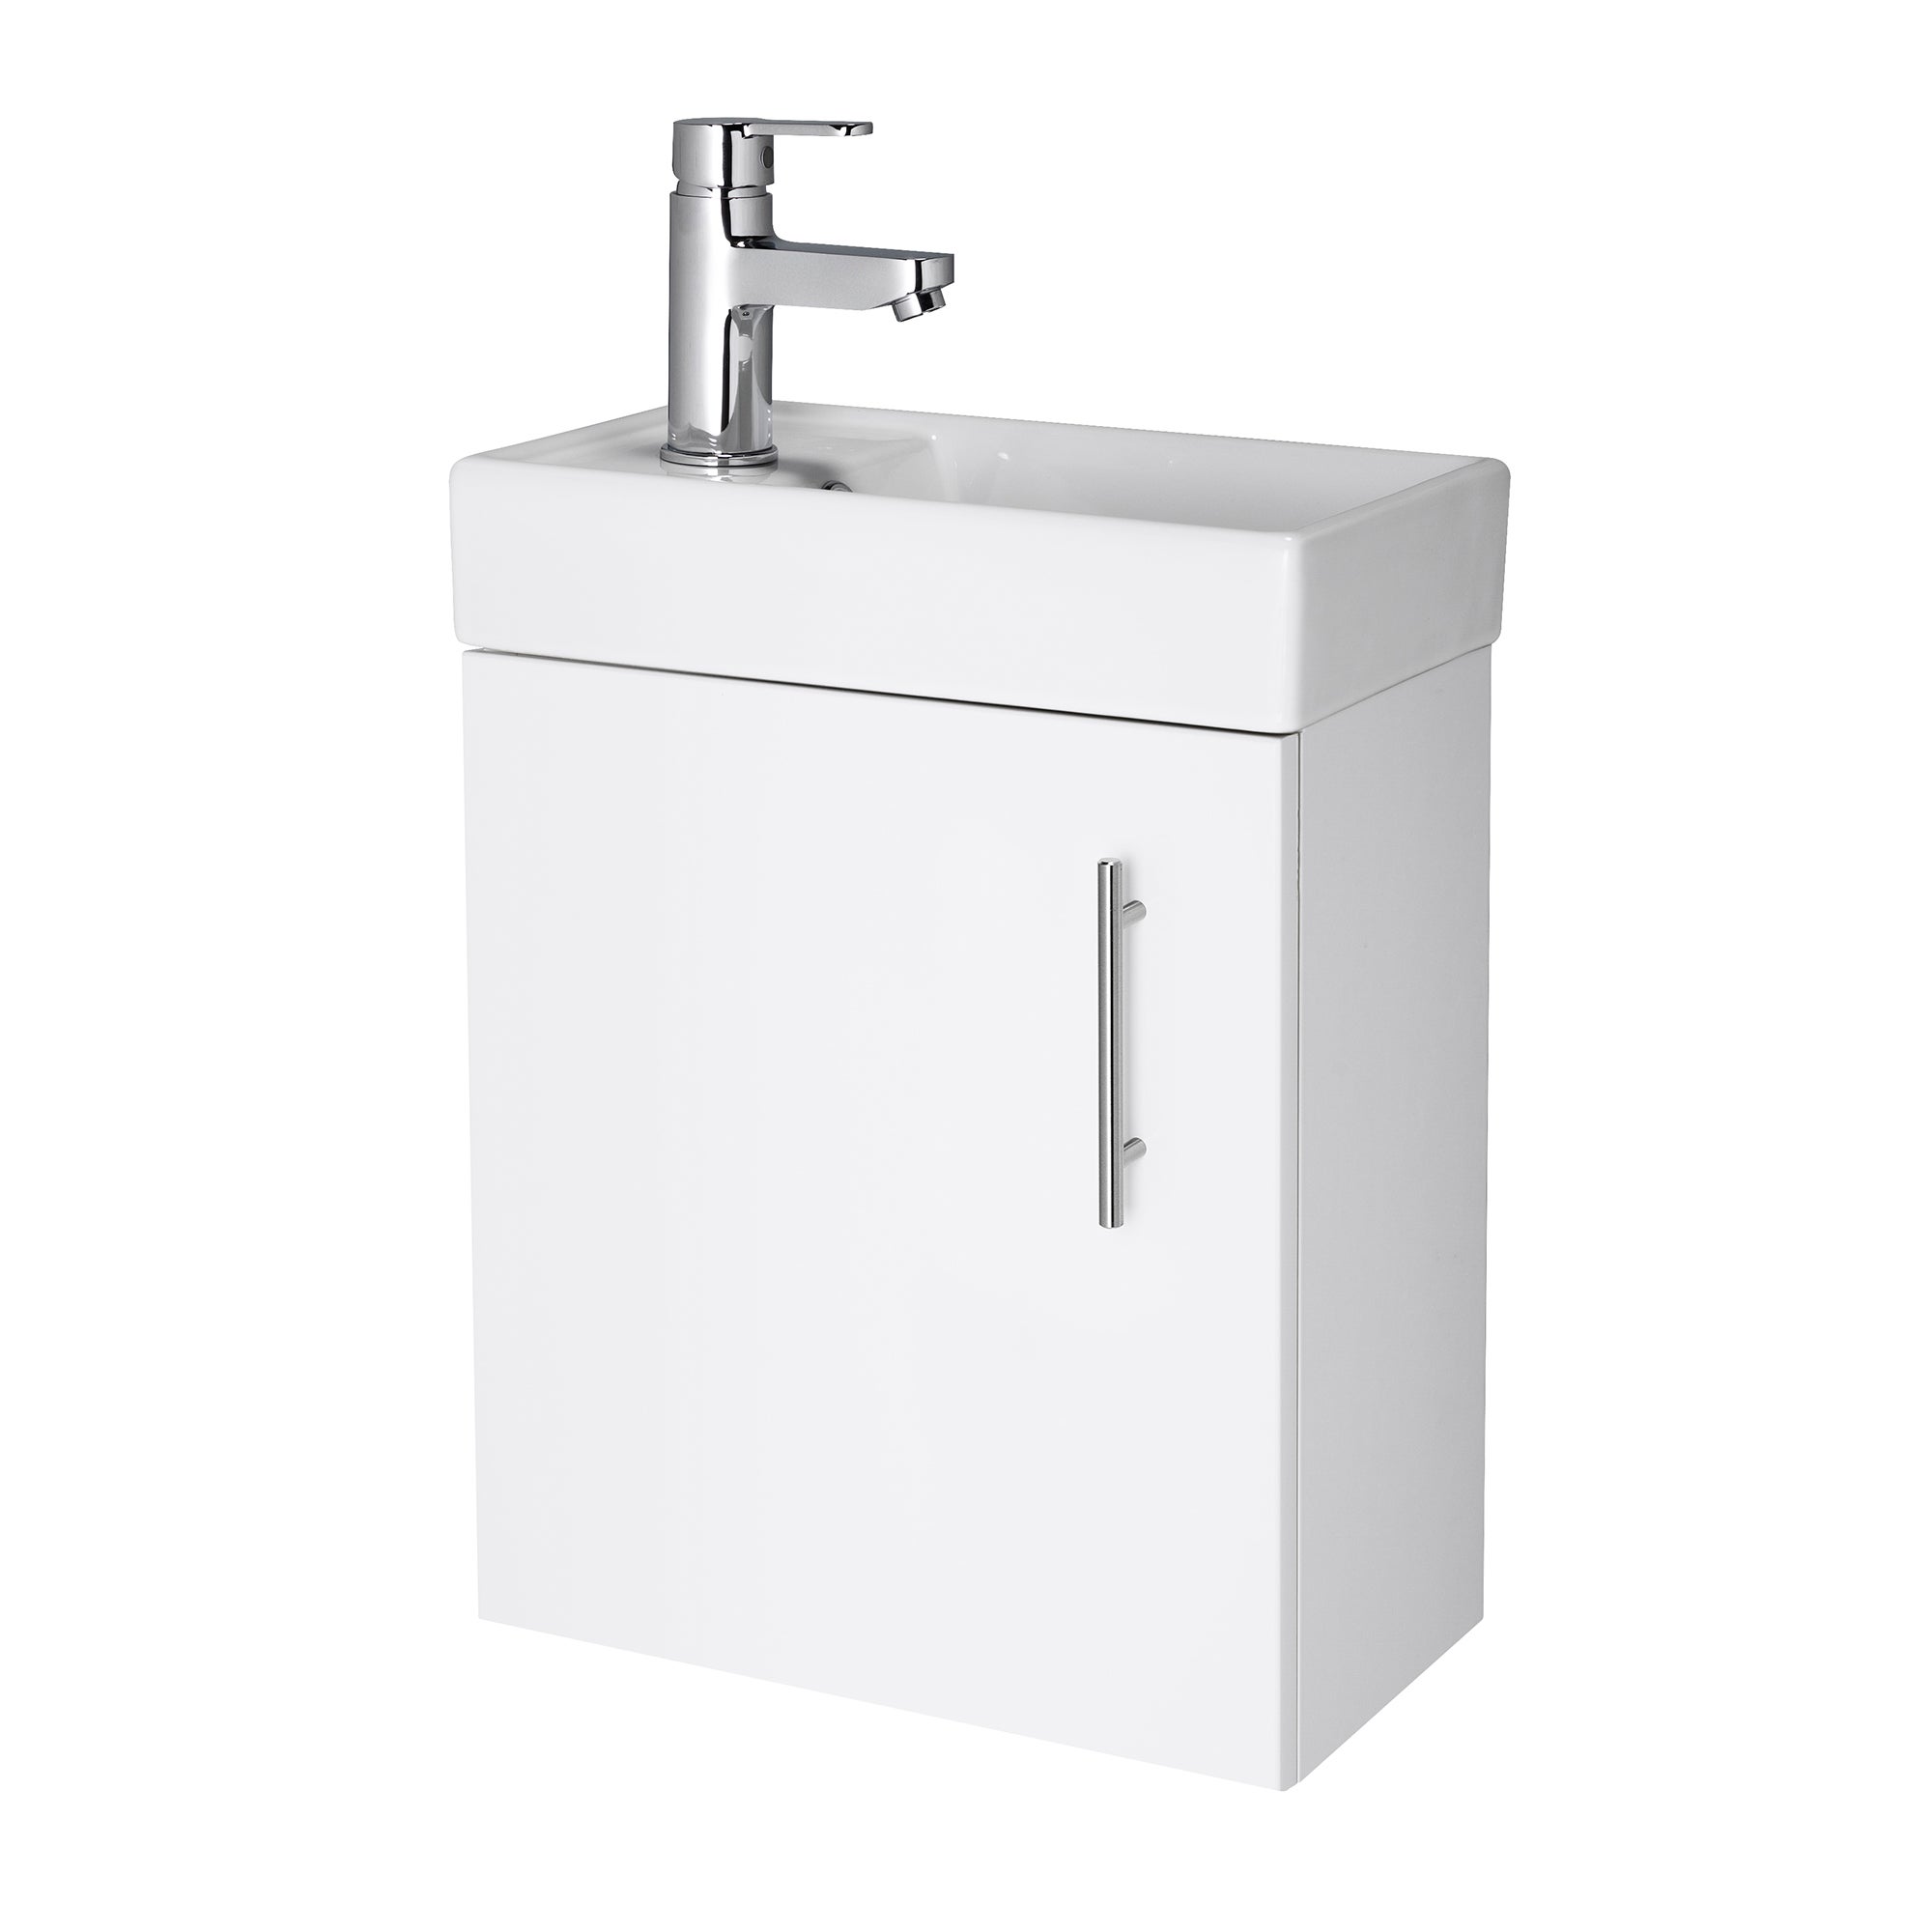 Vault Wall Mounted Vanity Unit with Basin Gloss White